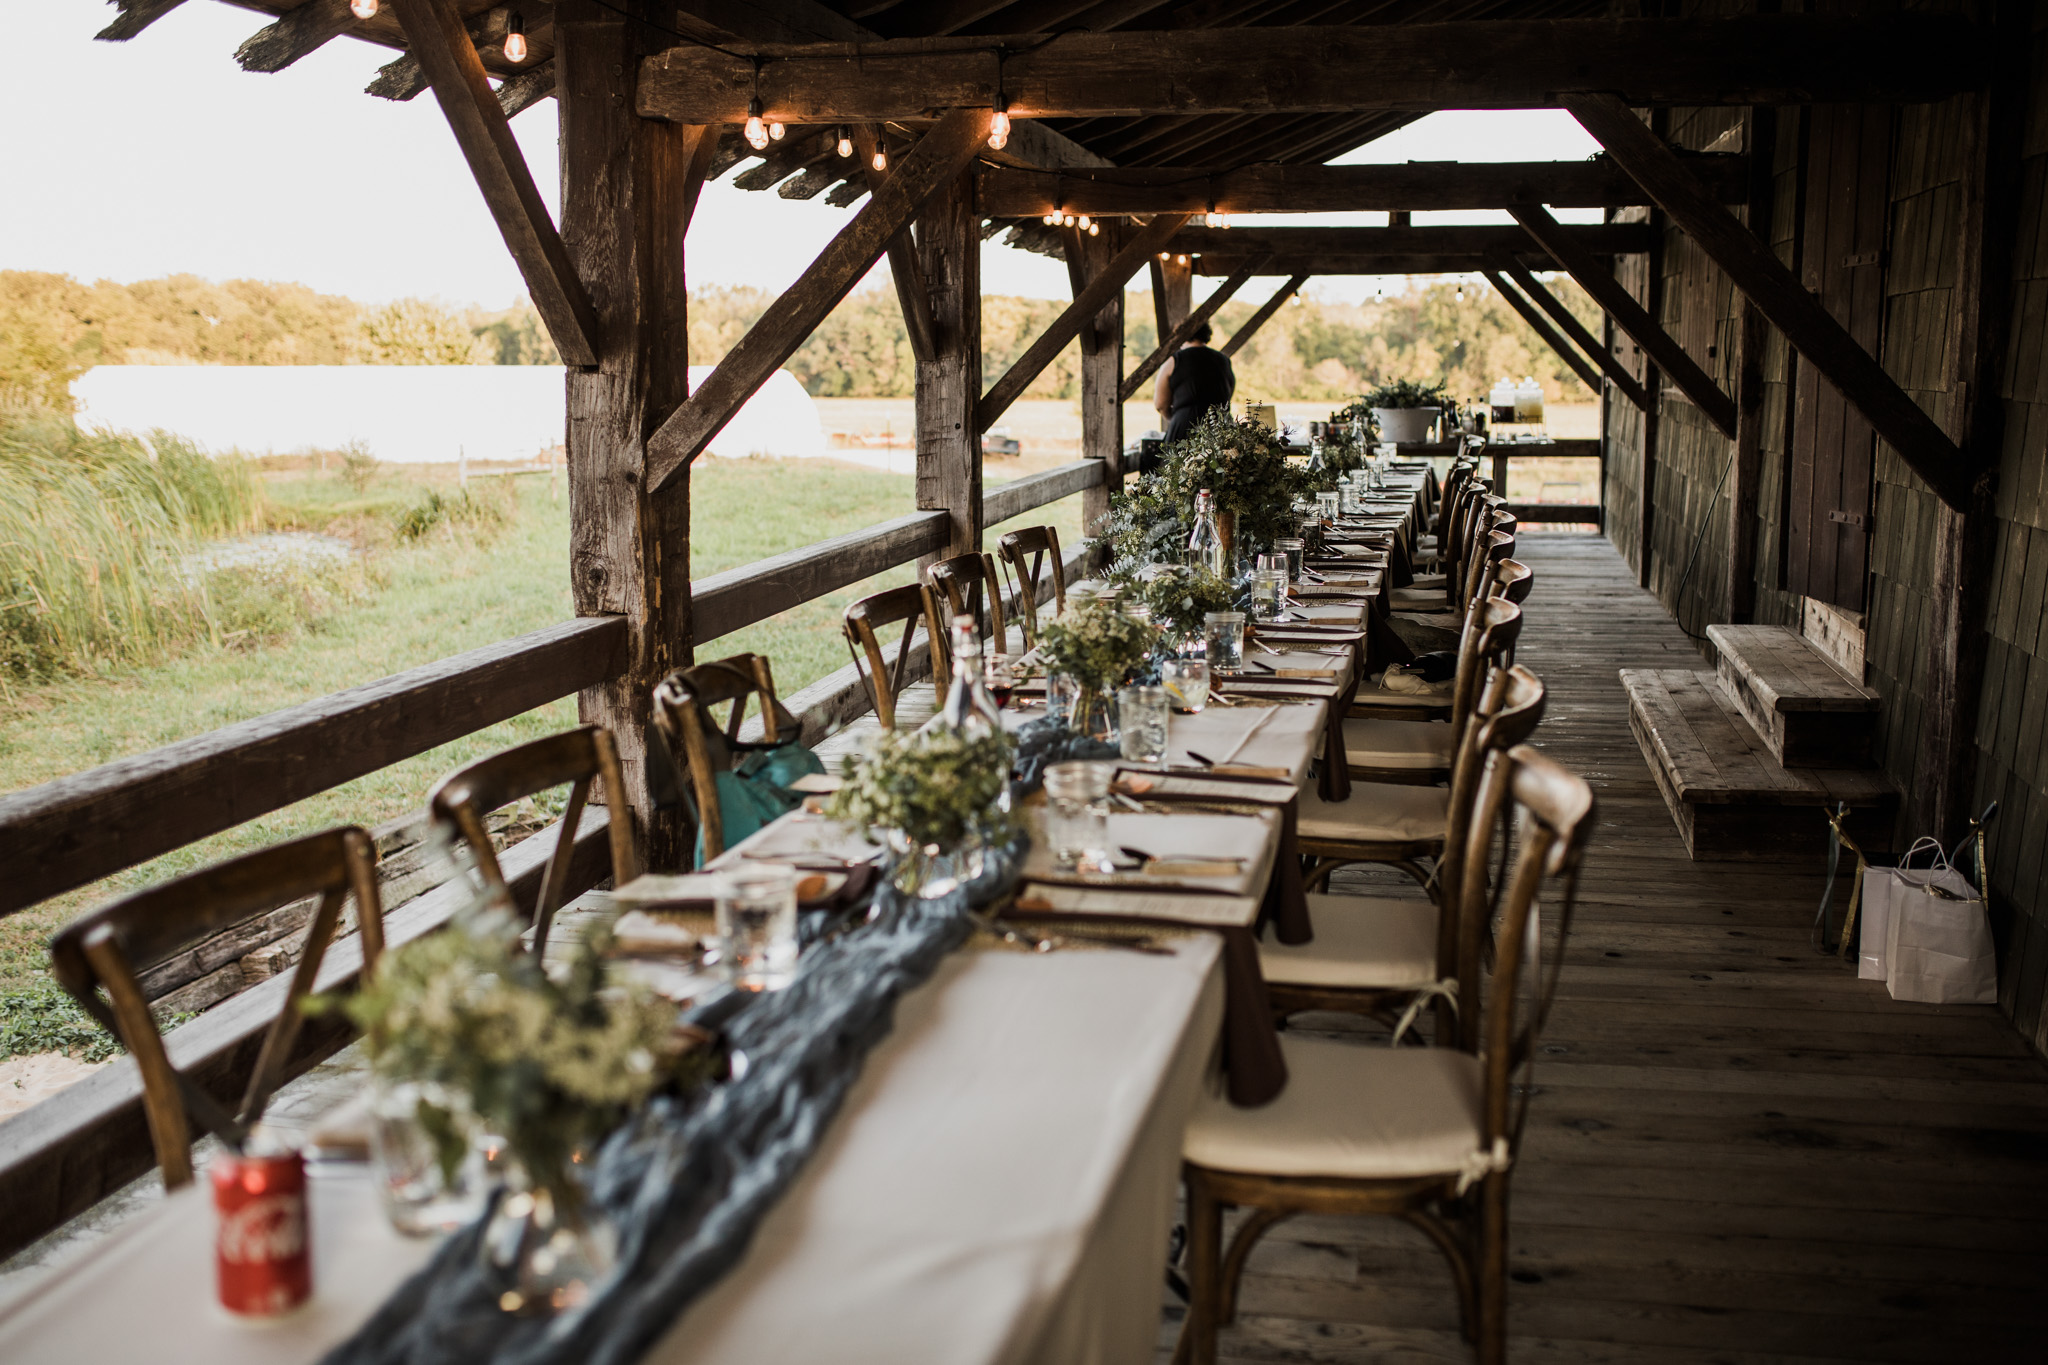 An intimate wedding tablescape during this Indiana fall wedding.